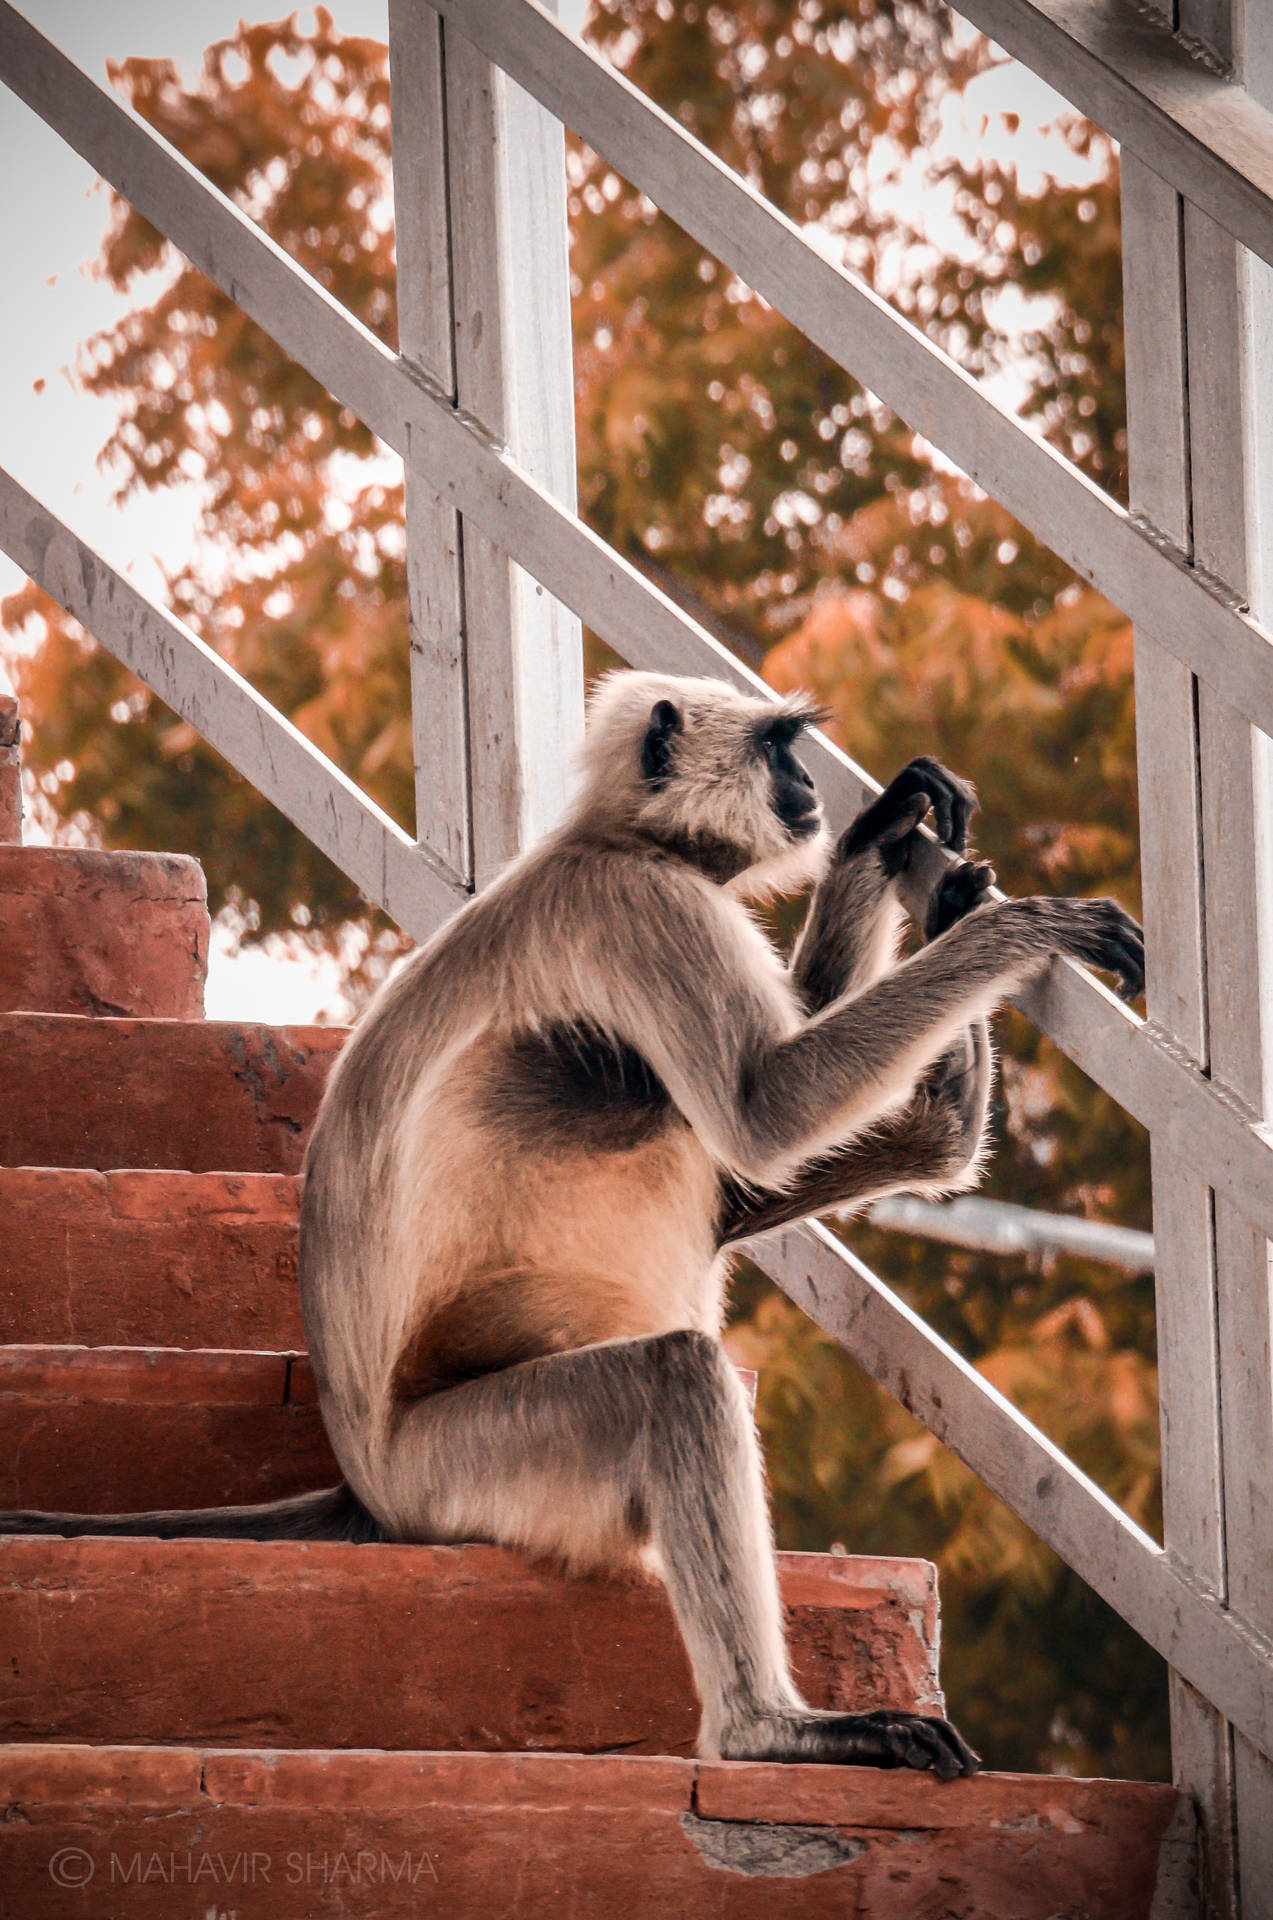 Funny Monkey On Stairs Wallpaper